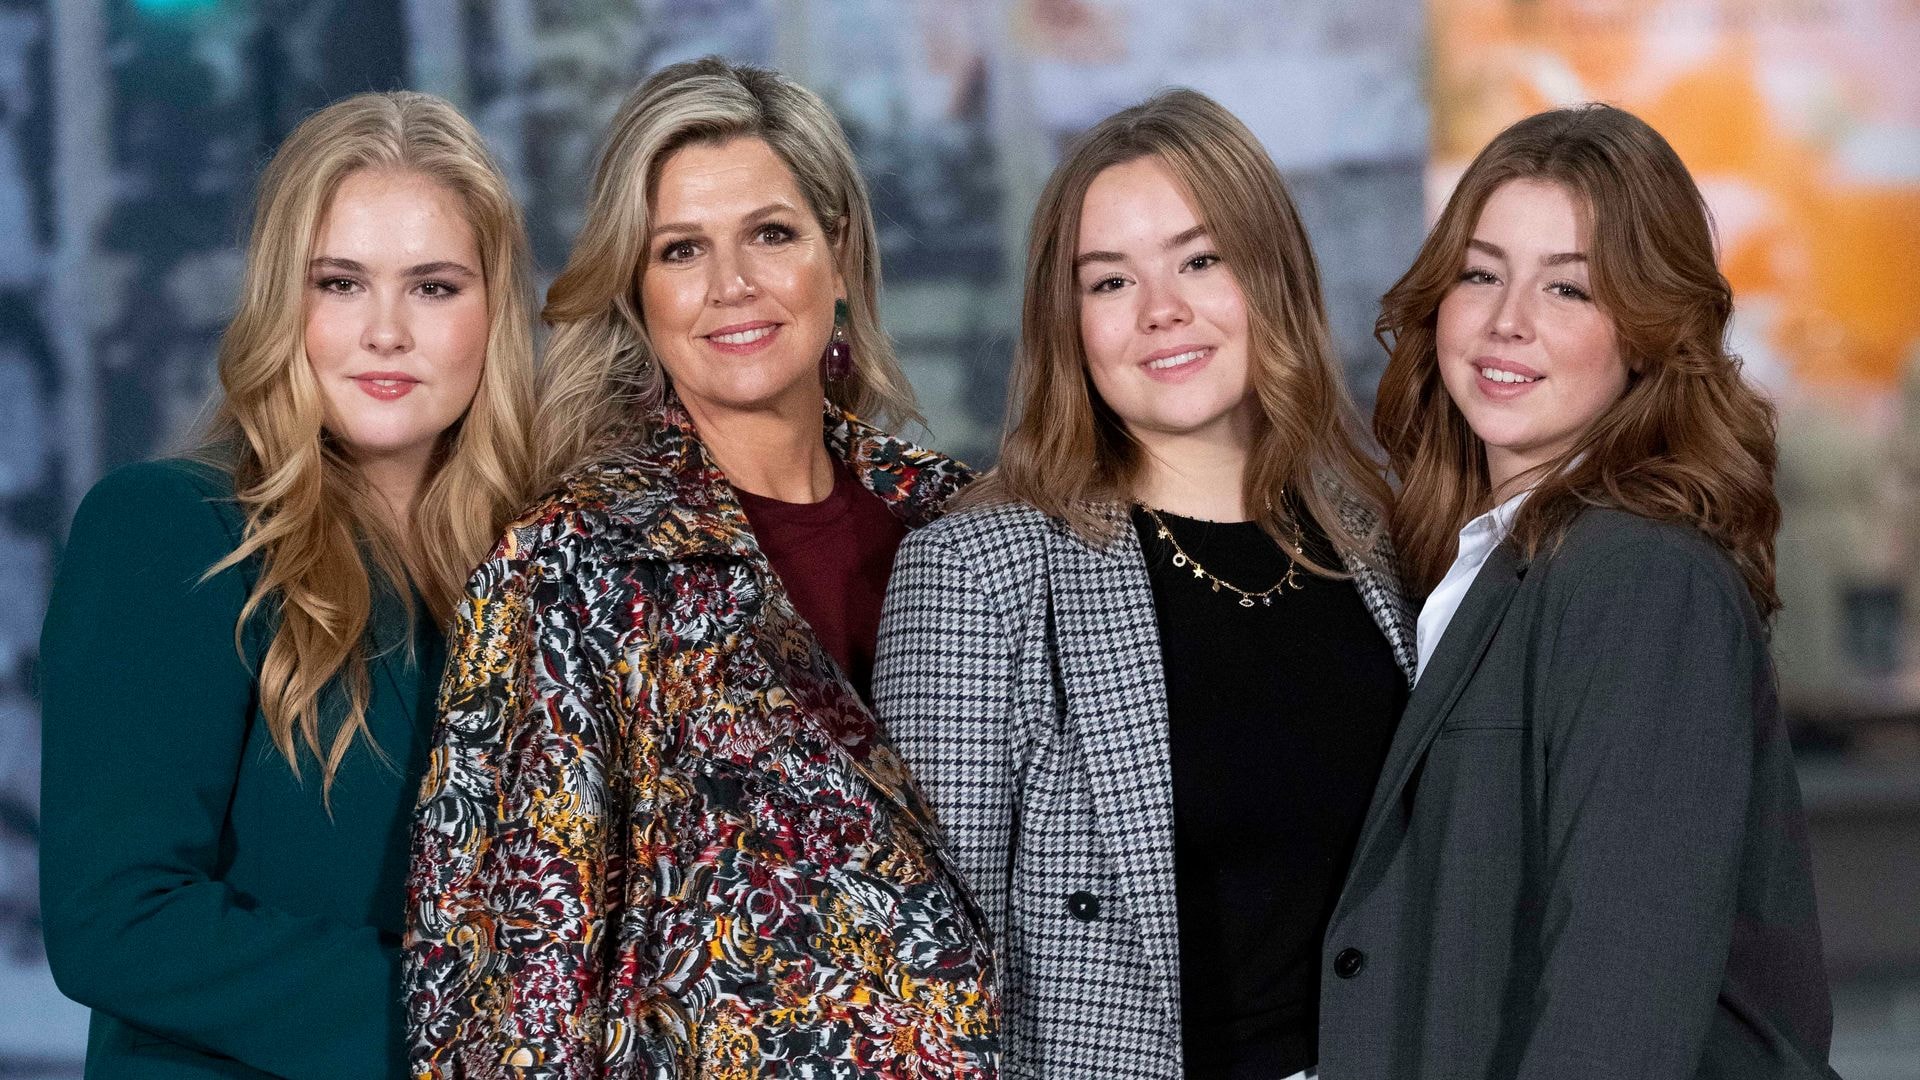 Queen Maxima stuns in super stylish monochrome ensemble with lookalike daughters